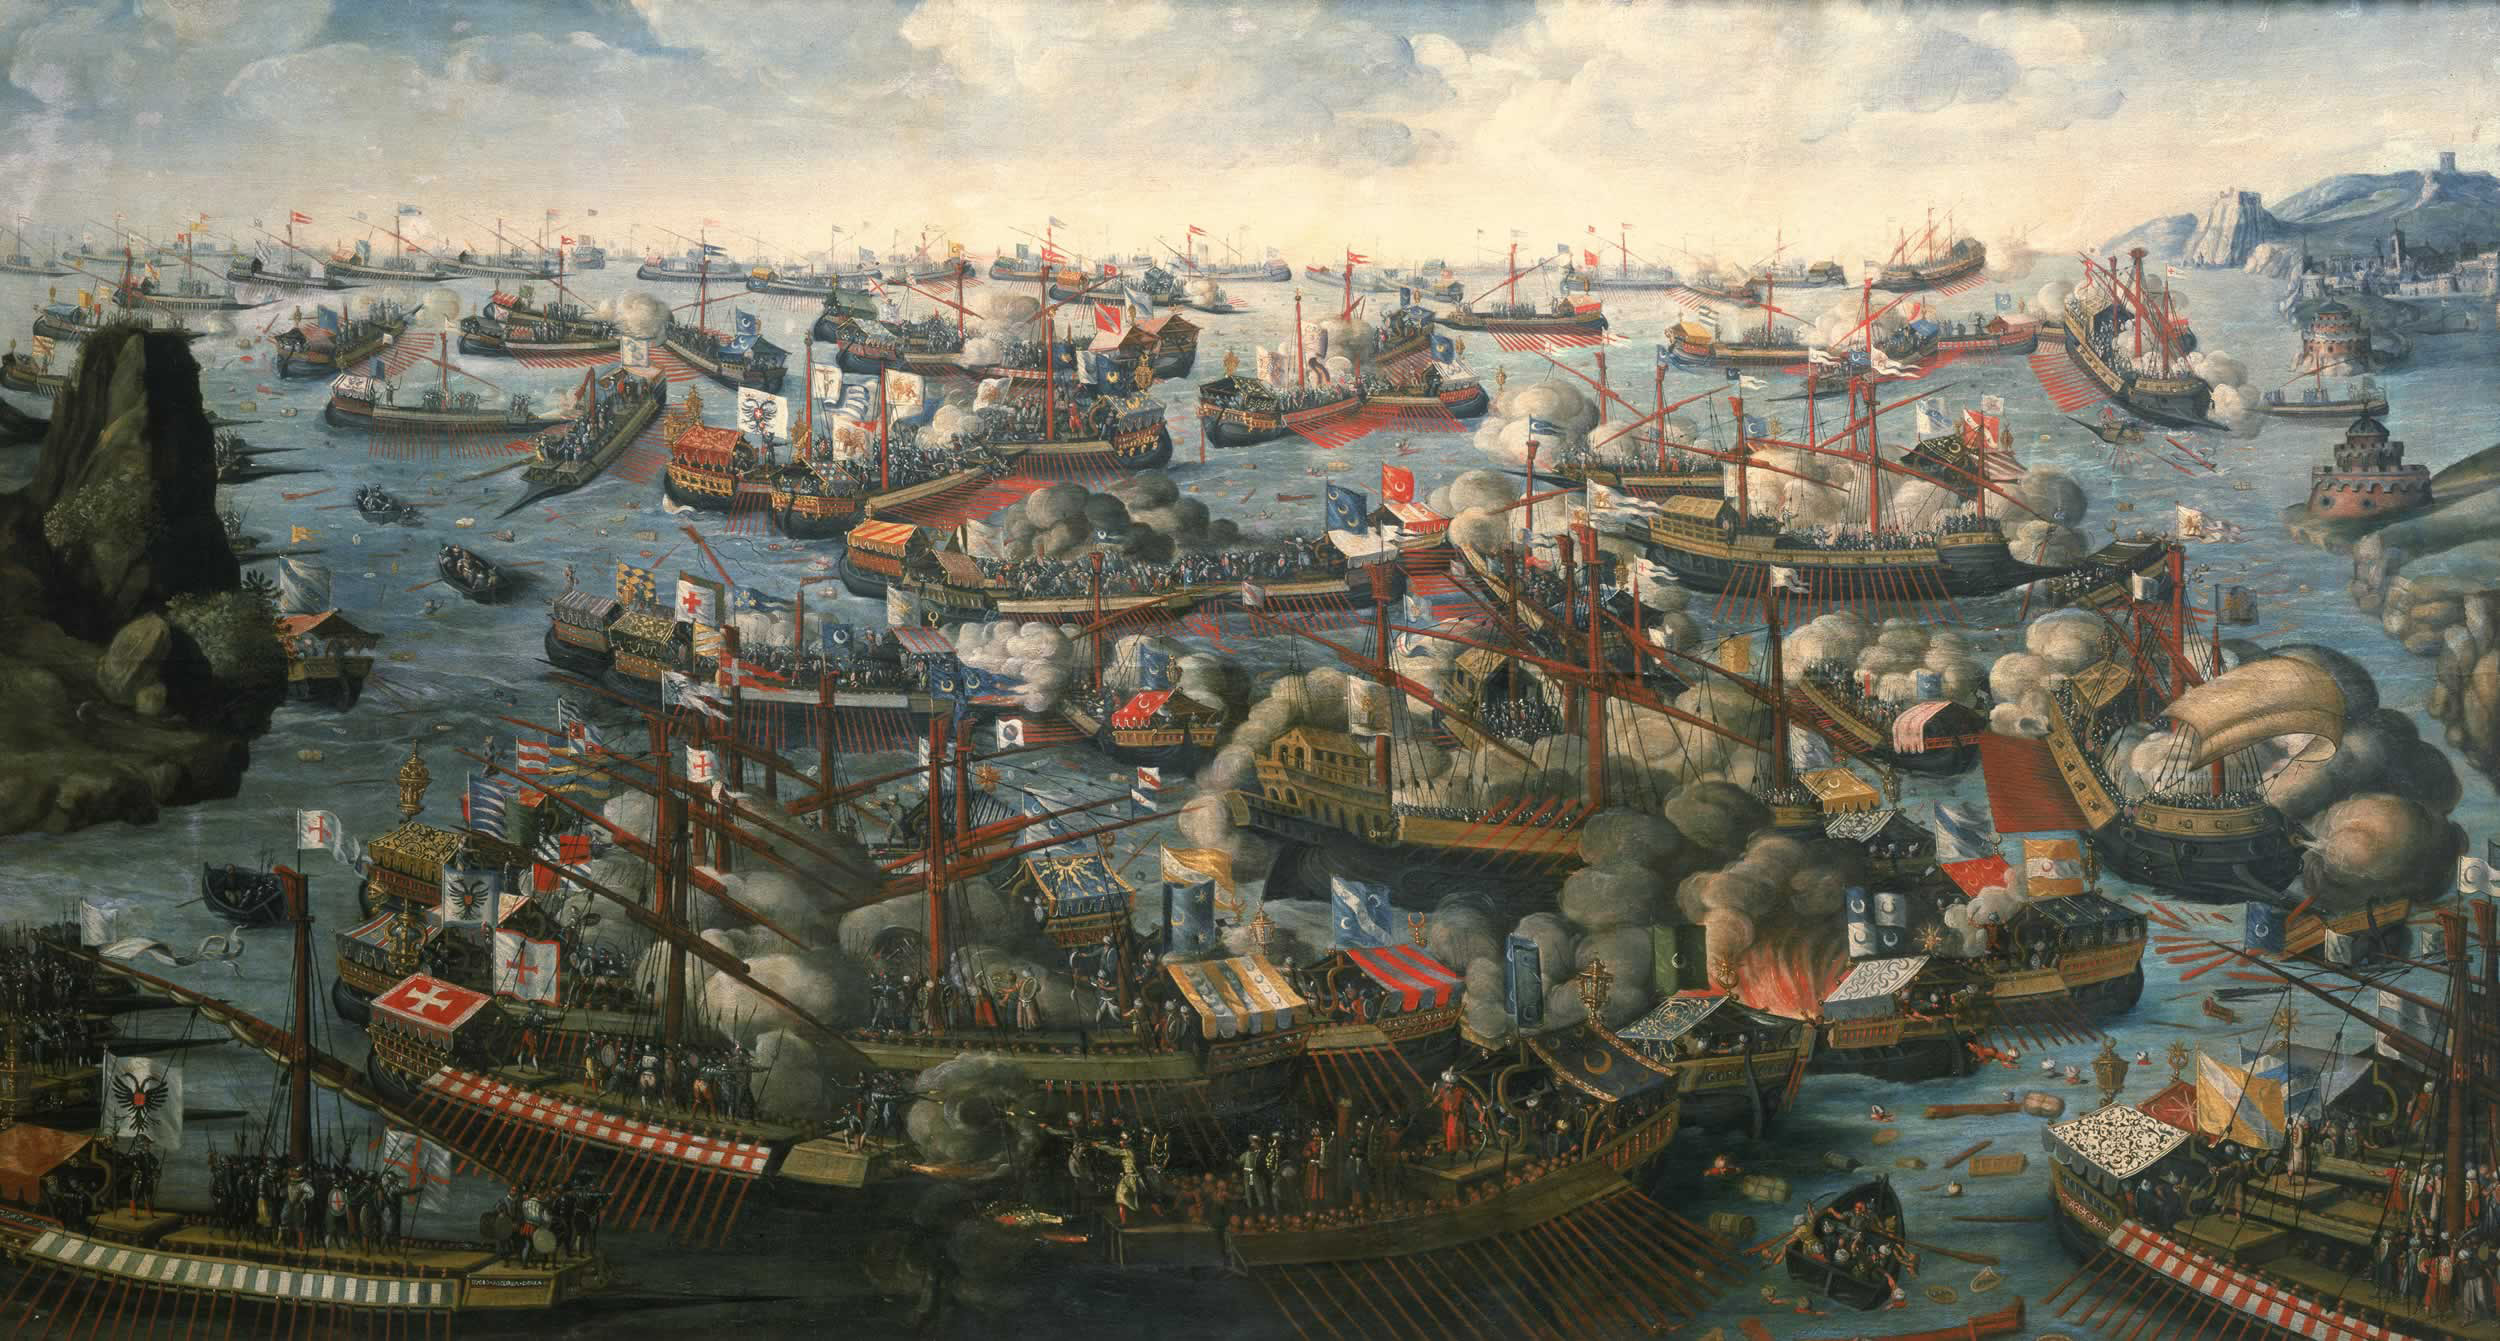 Battle of Lepanto is fought, and the Holy League (Spain and Italy) destroys the Turkish fleet